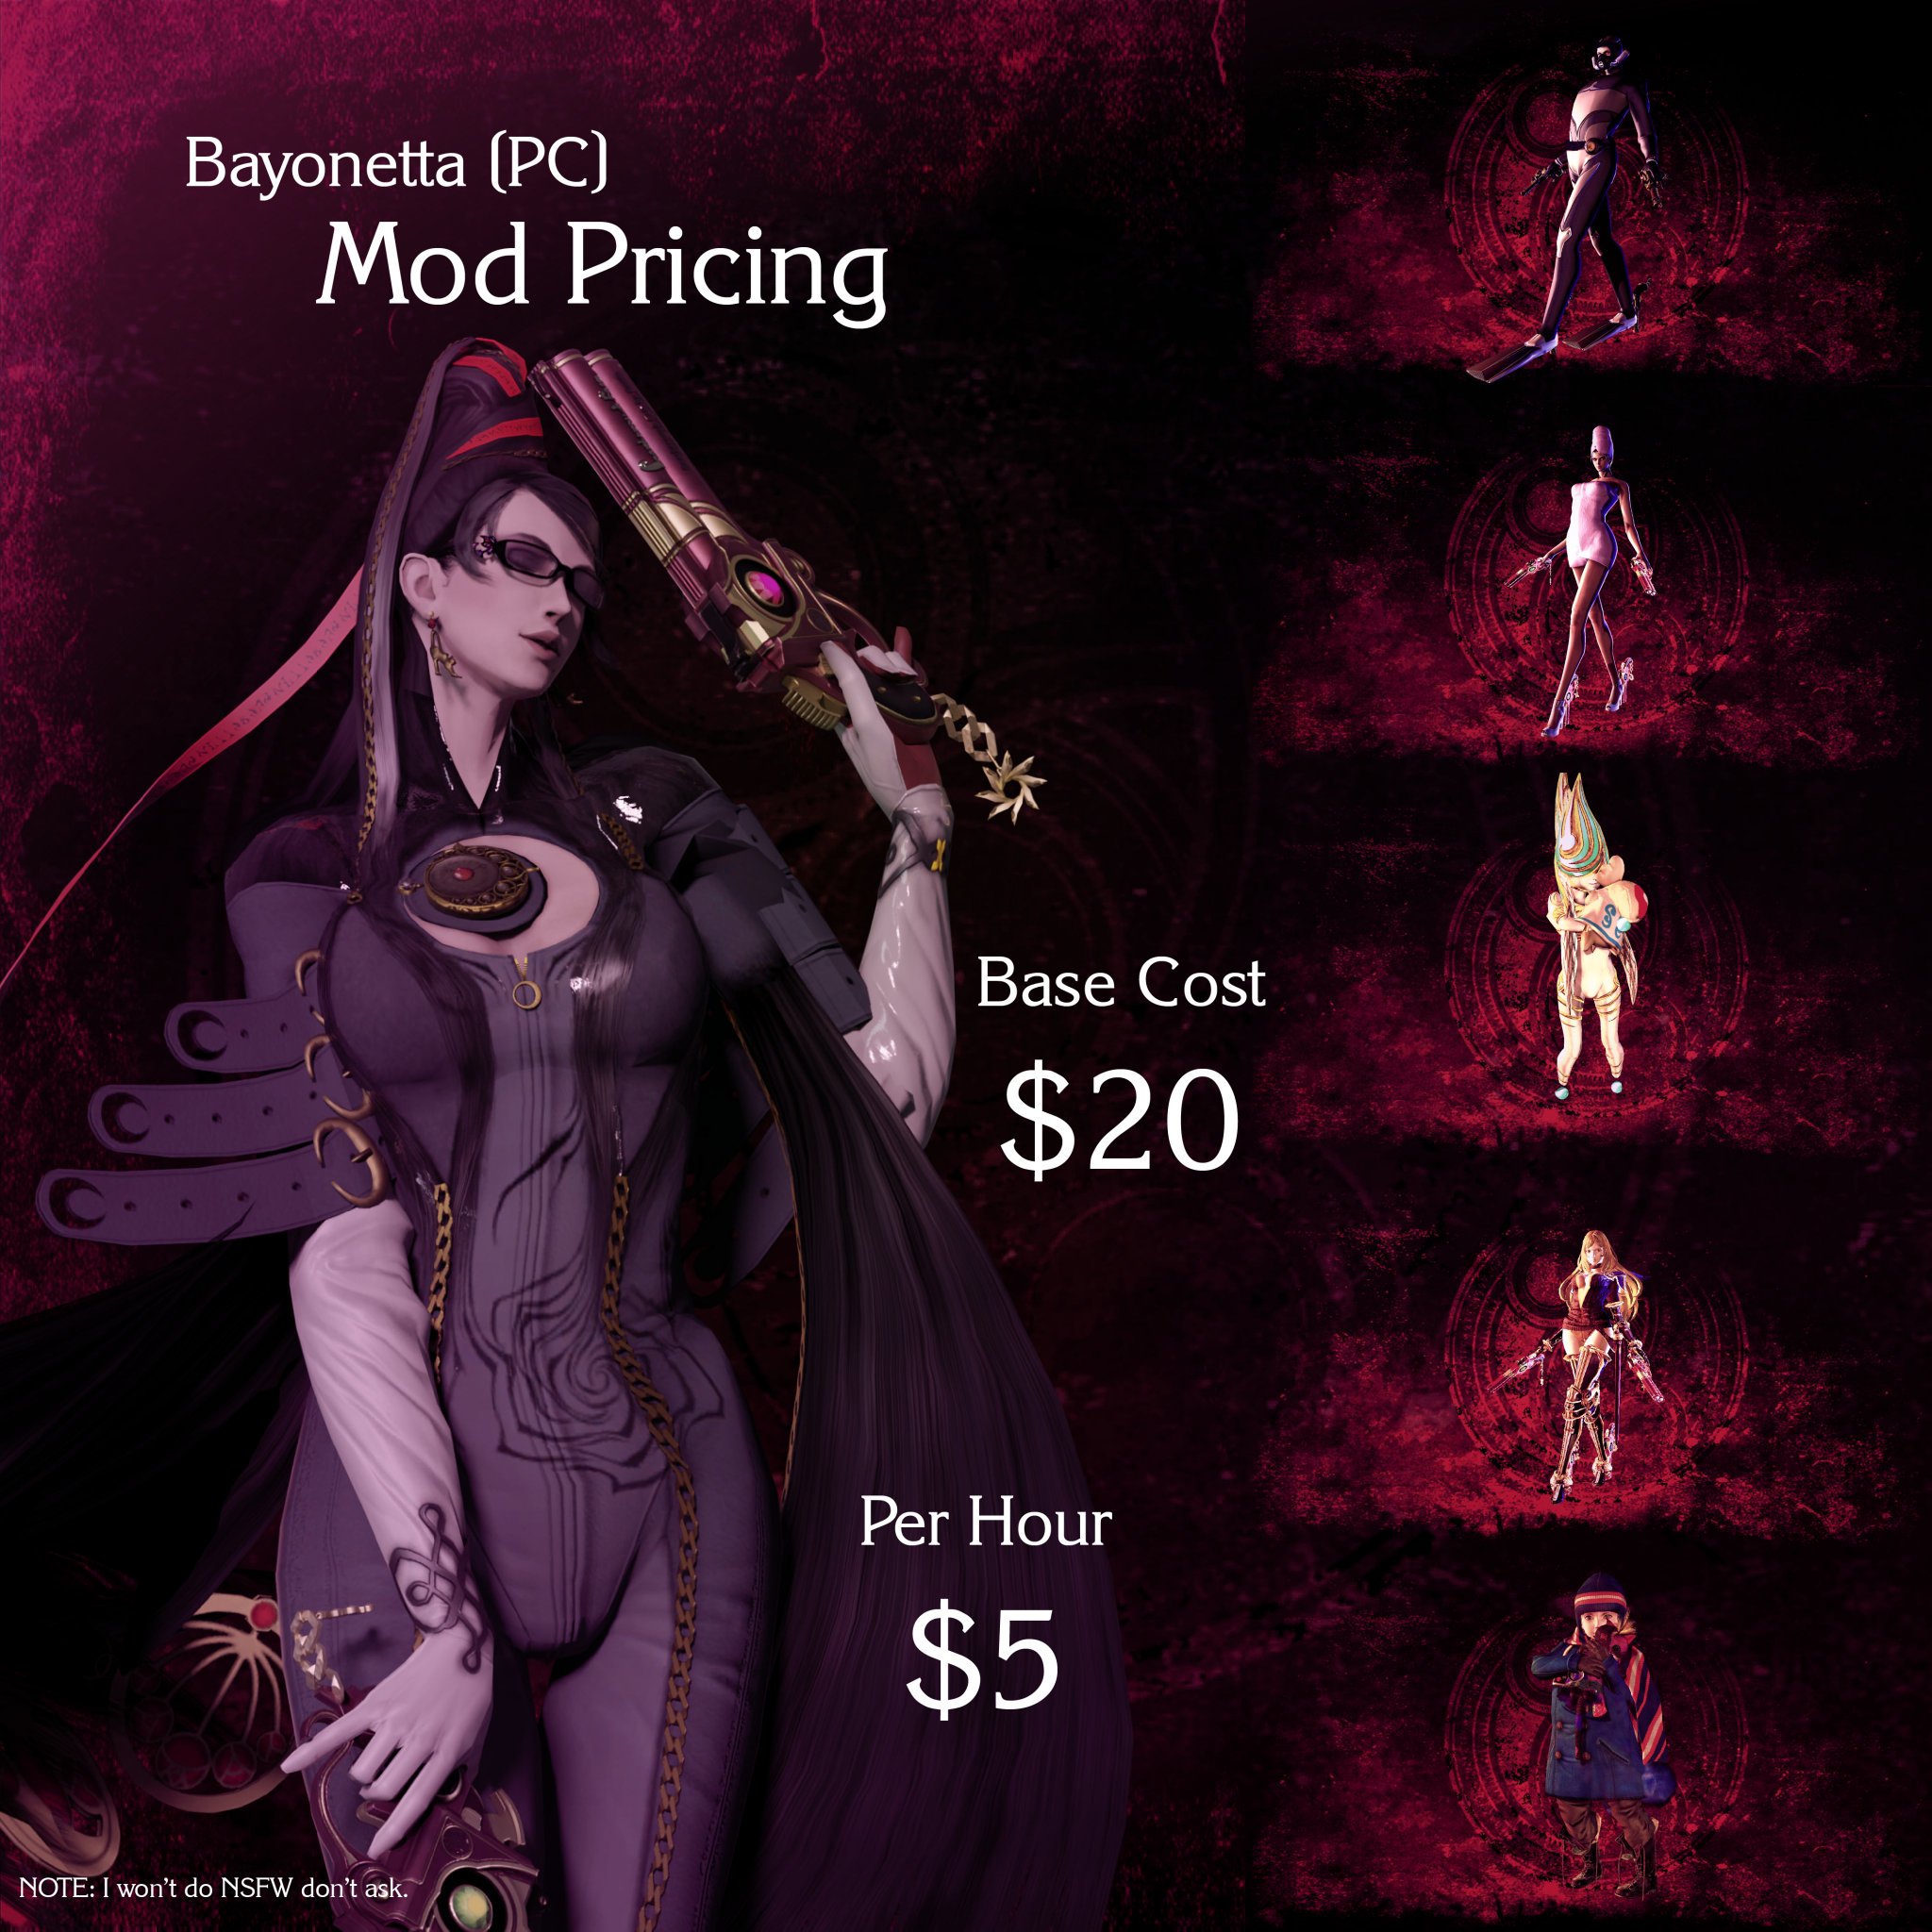 Is there a mod that replaces the current UI in the game with the ones shown  in the picture? : r/Bayonetta